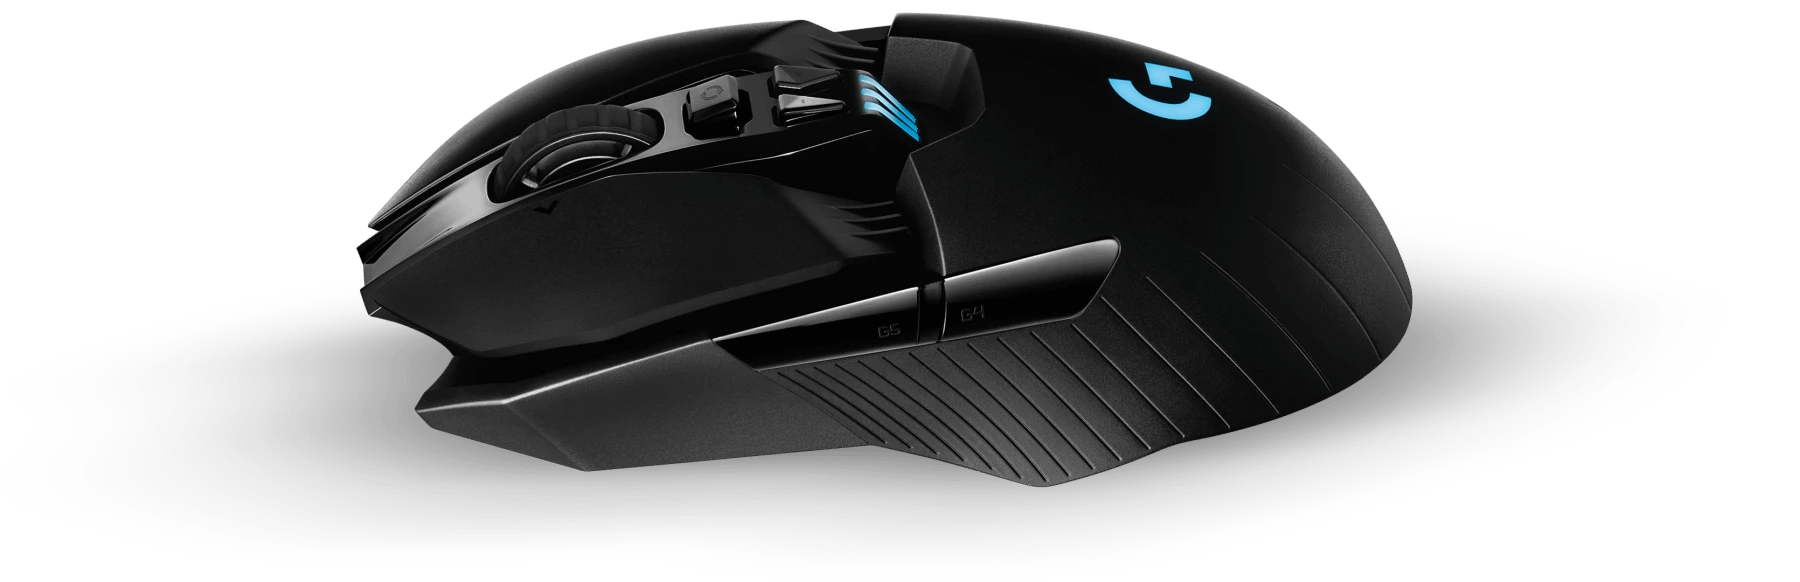 best gifts for gamers: gaming mouse